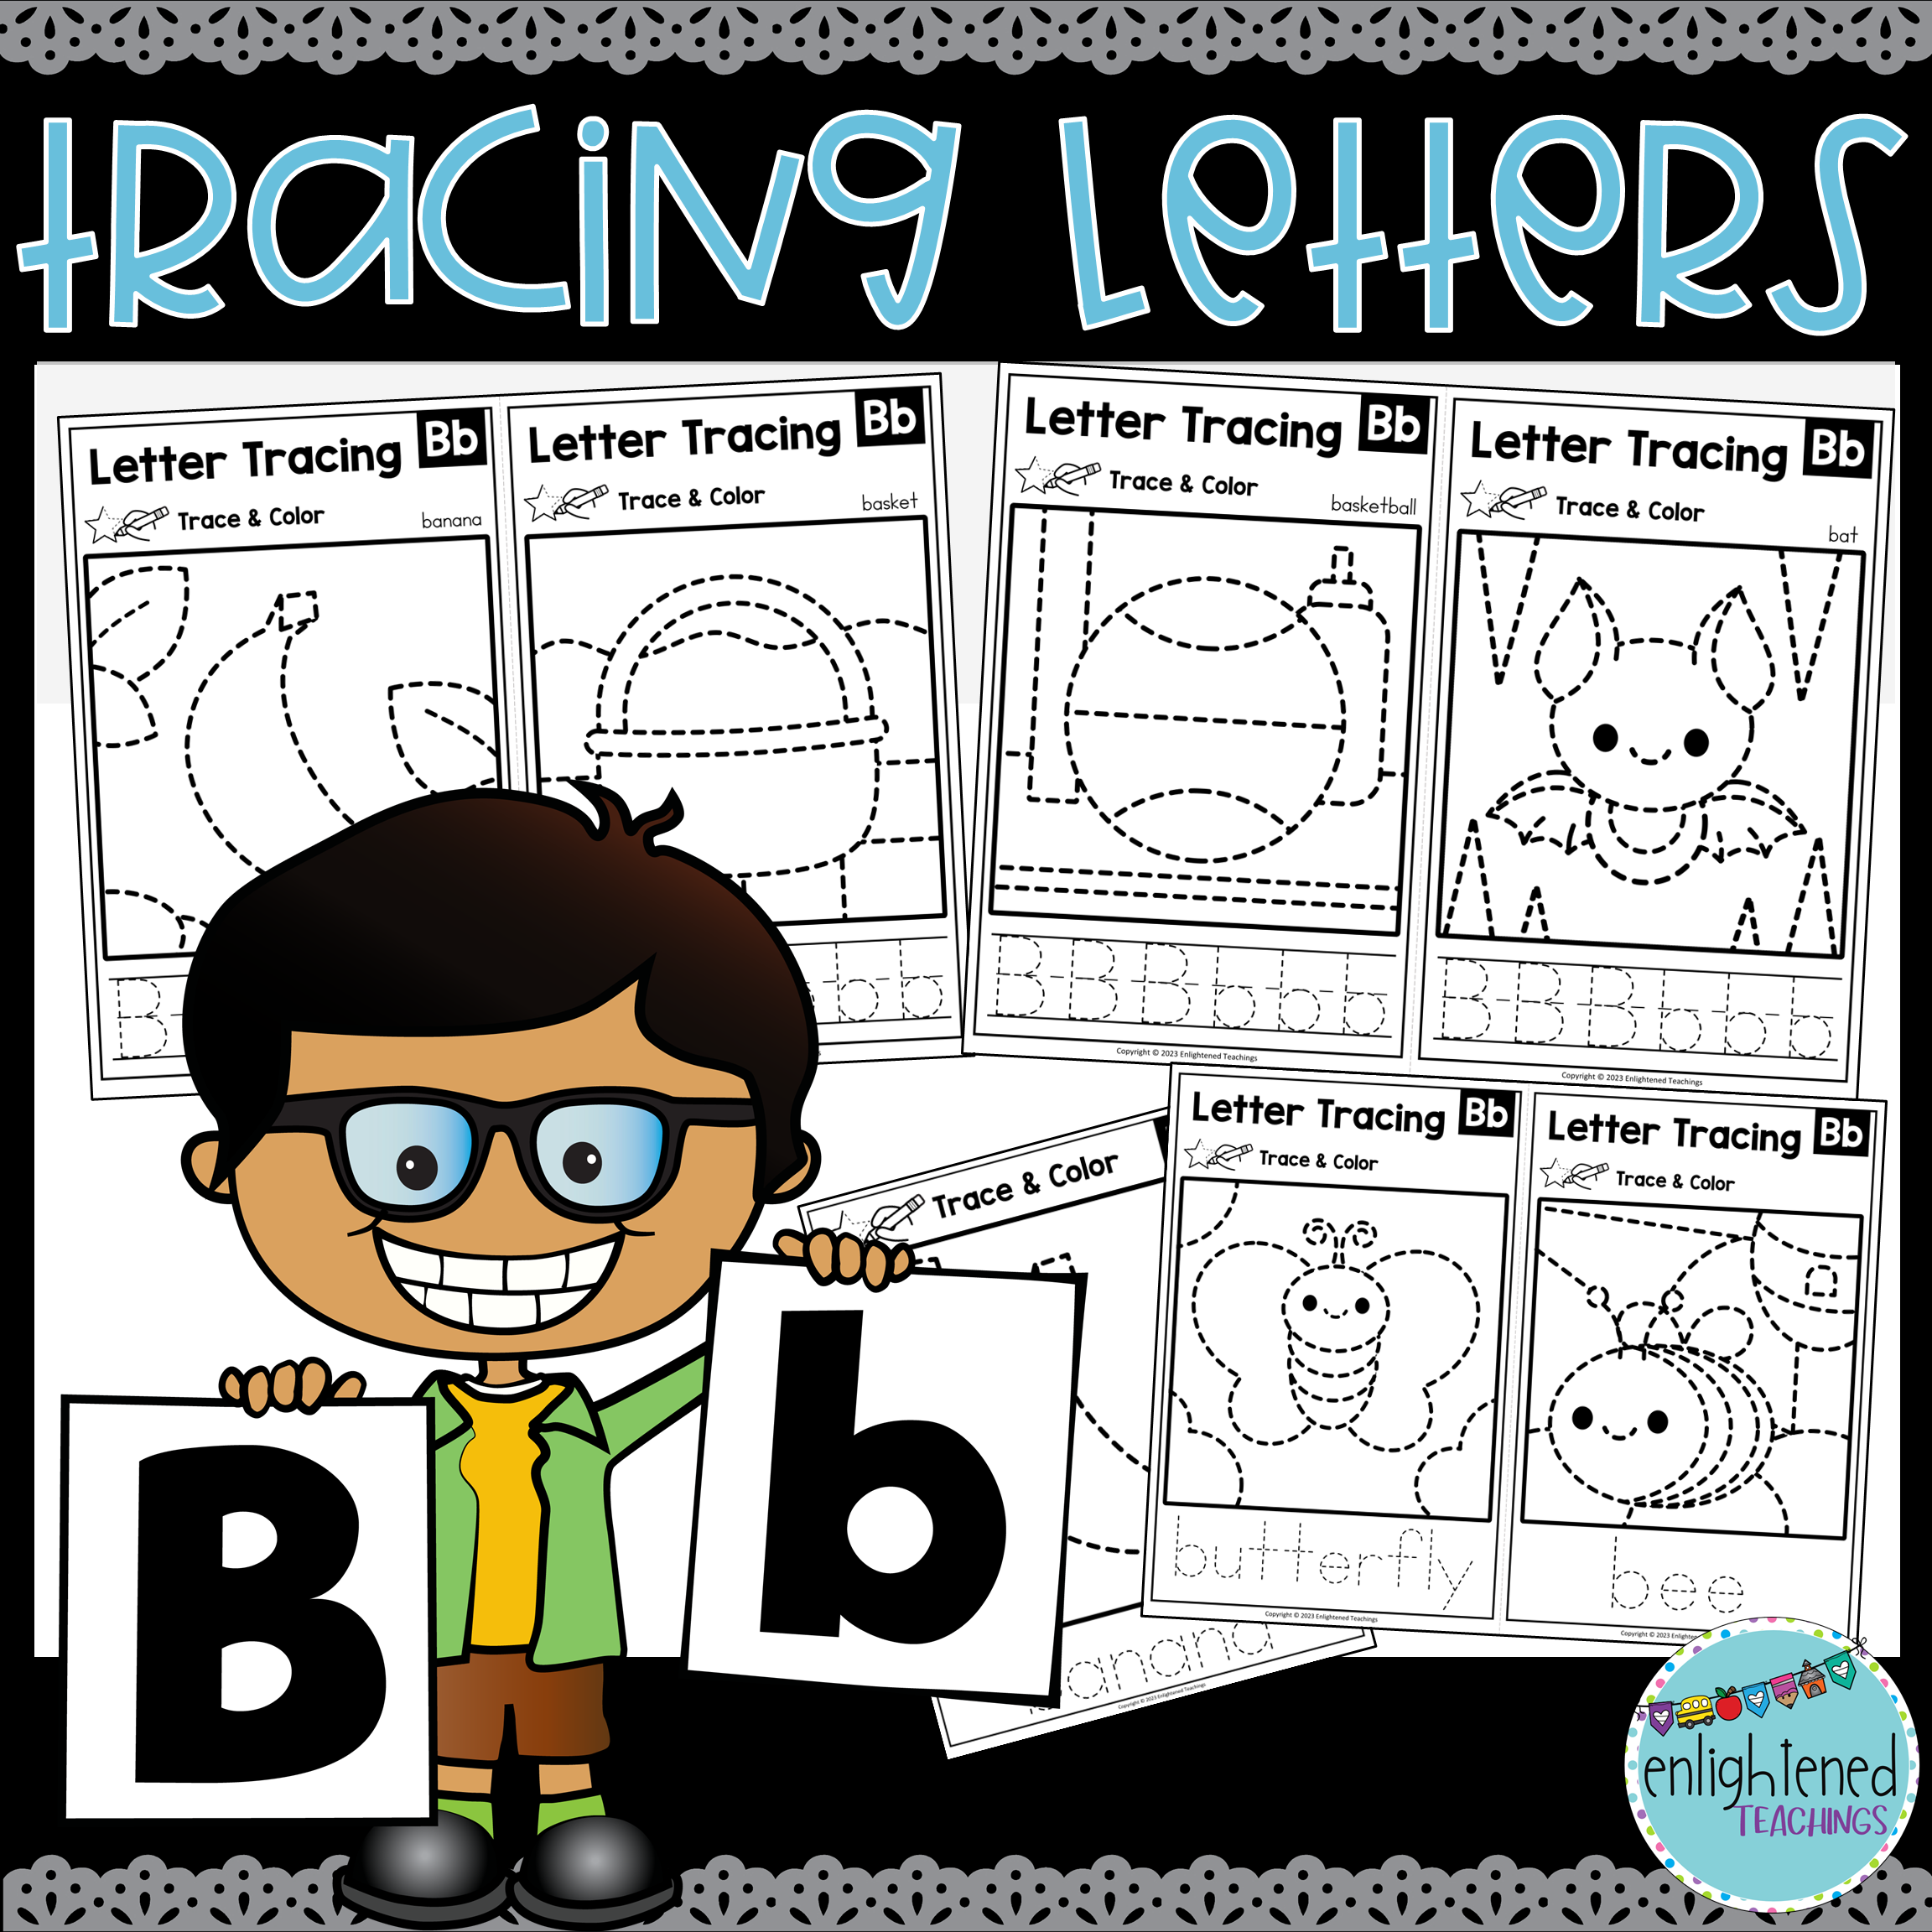 Letter b tracing worksheets letter tracing mats letter b trace color made by teachers